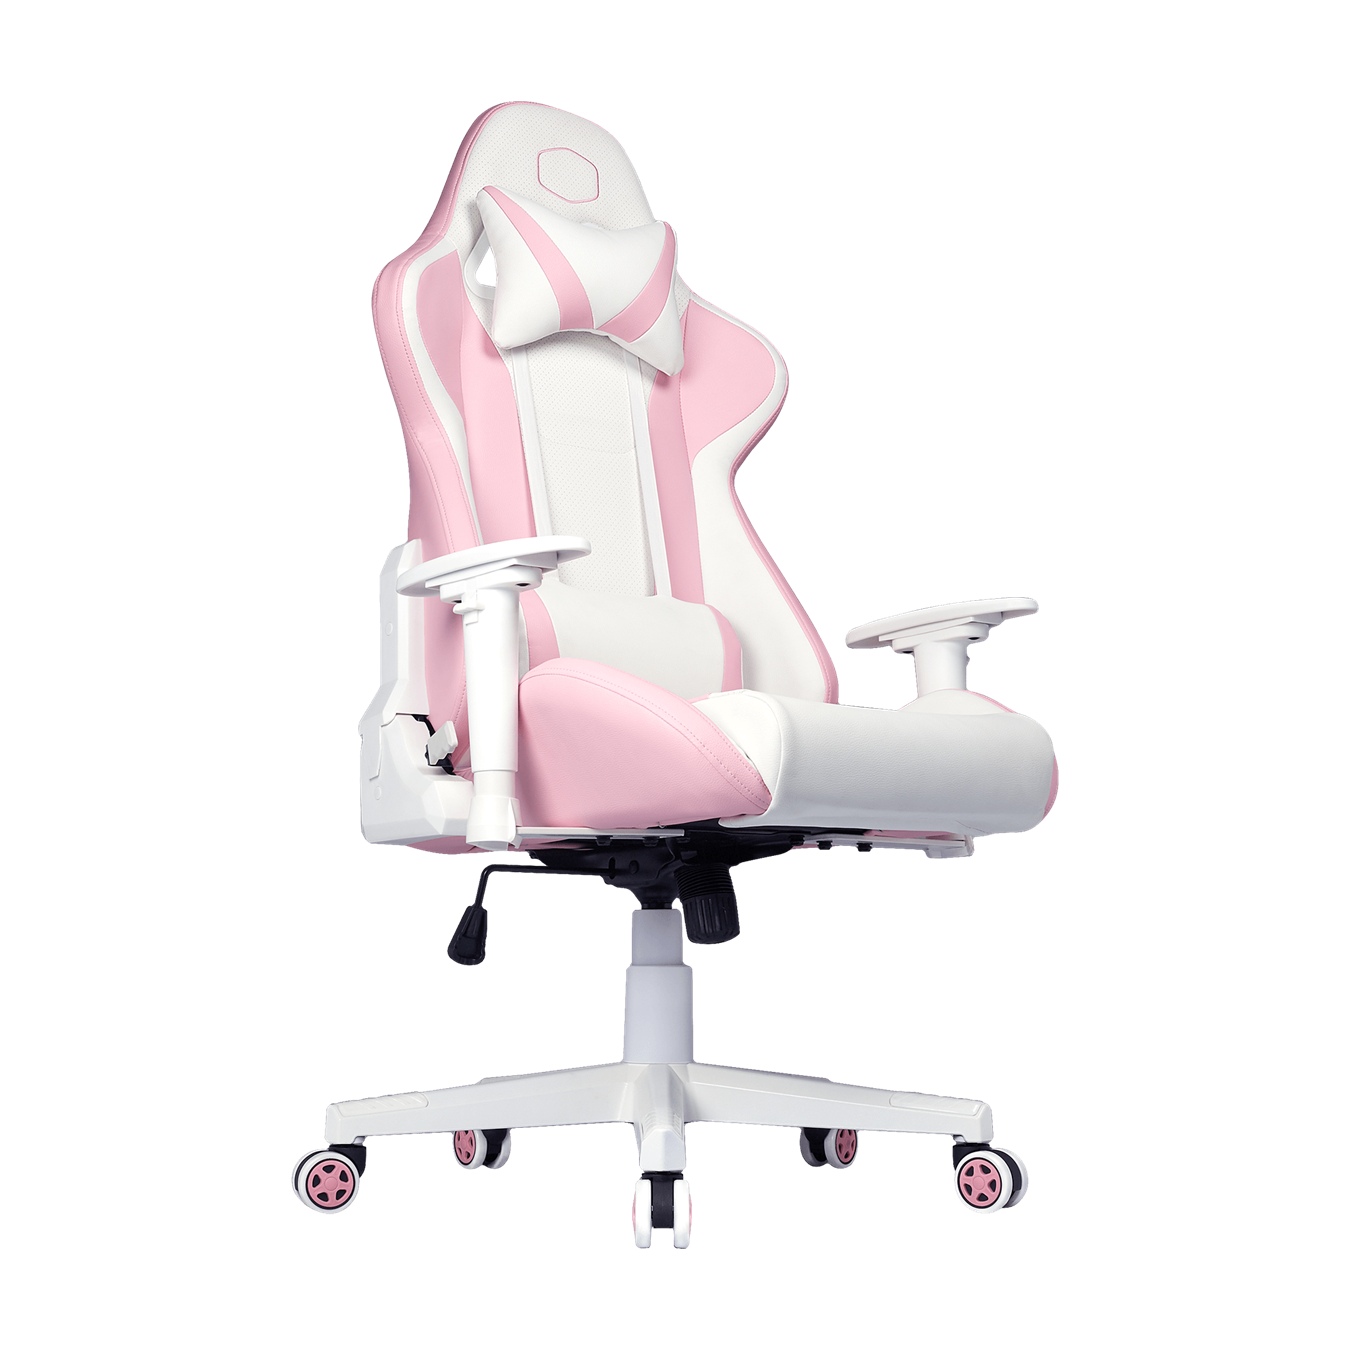 Caliber R1S Rose White Edition Gaming Chair - Front view of 45 degree angle